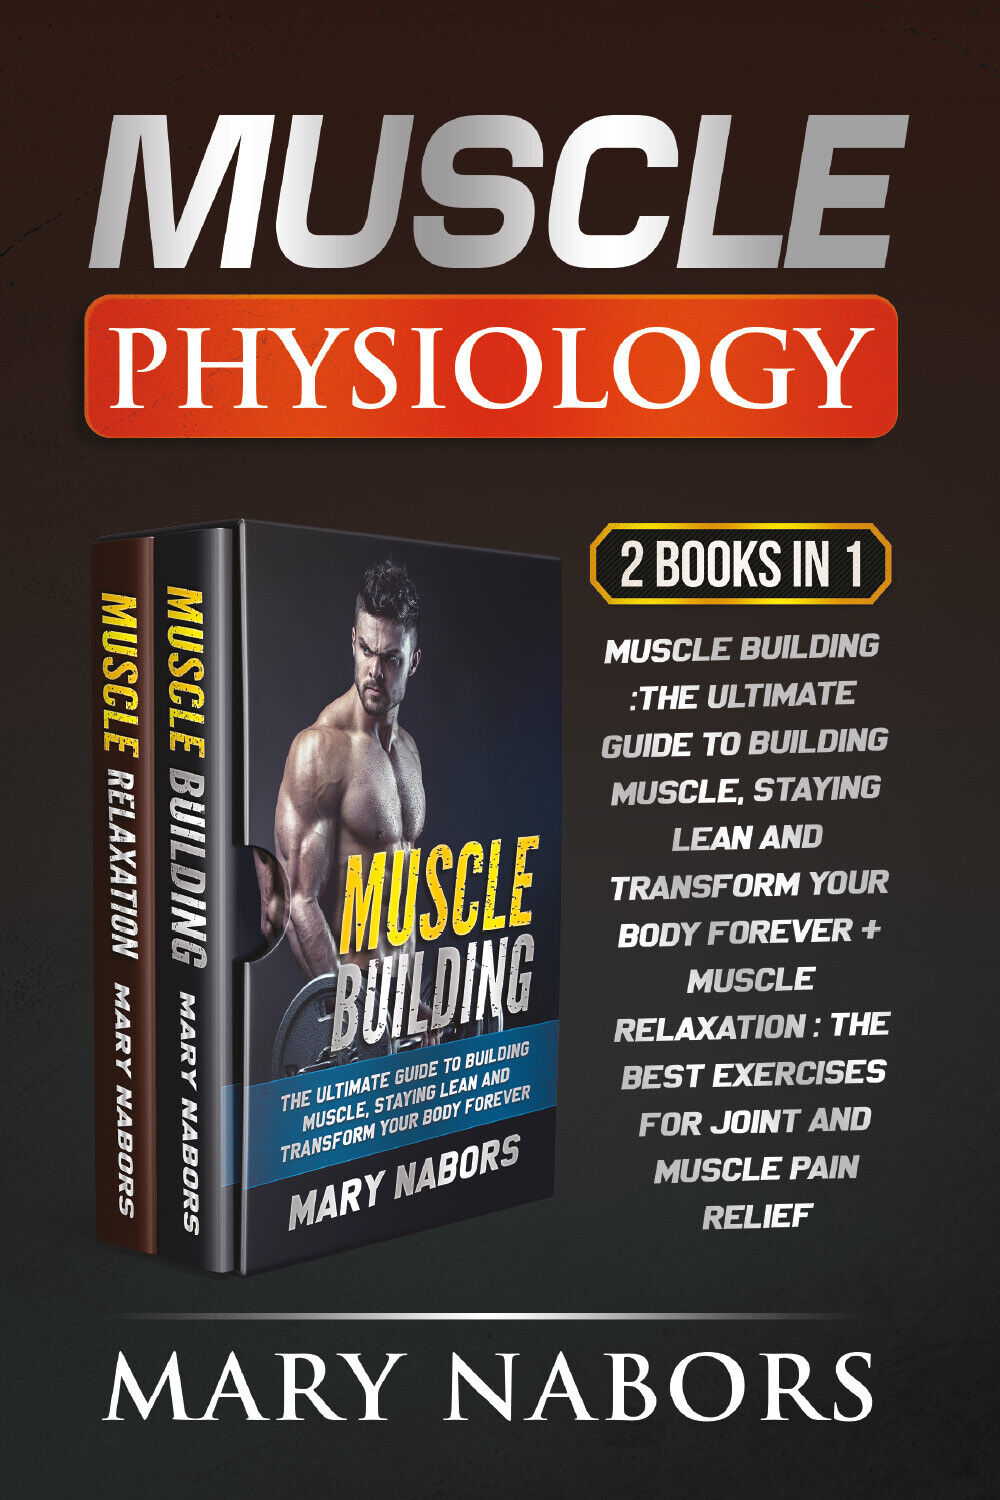 Muscle Physiology (2 Books in 1). Muscle Building :The Ultimate Guide to Buildin libro usato